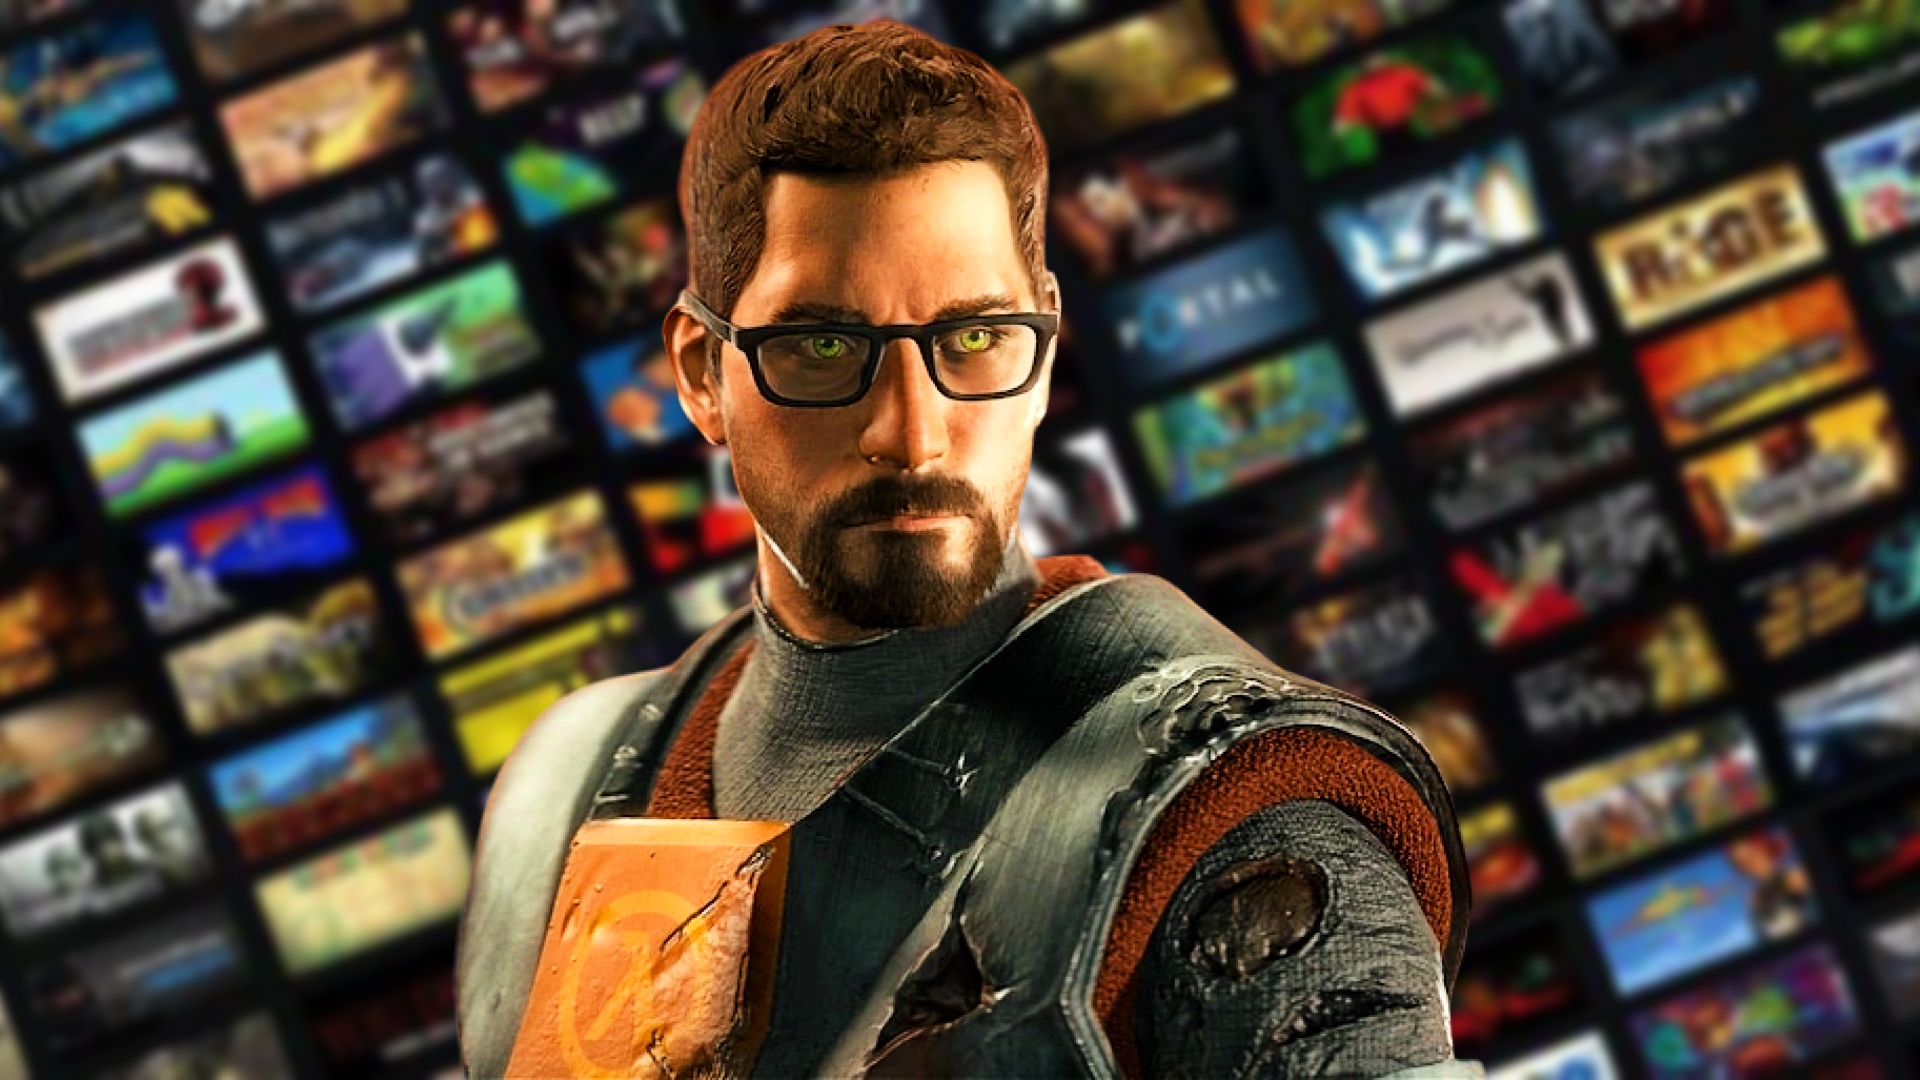 Half-Life is a free game on Steam, for now